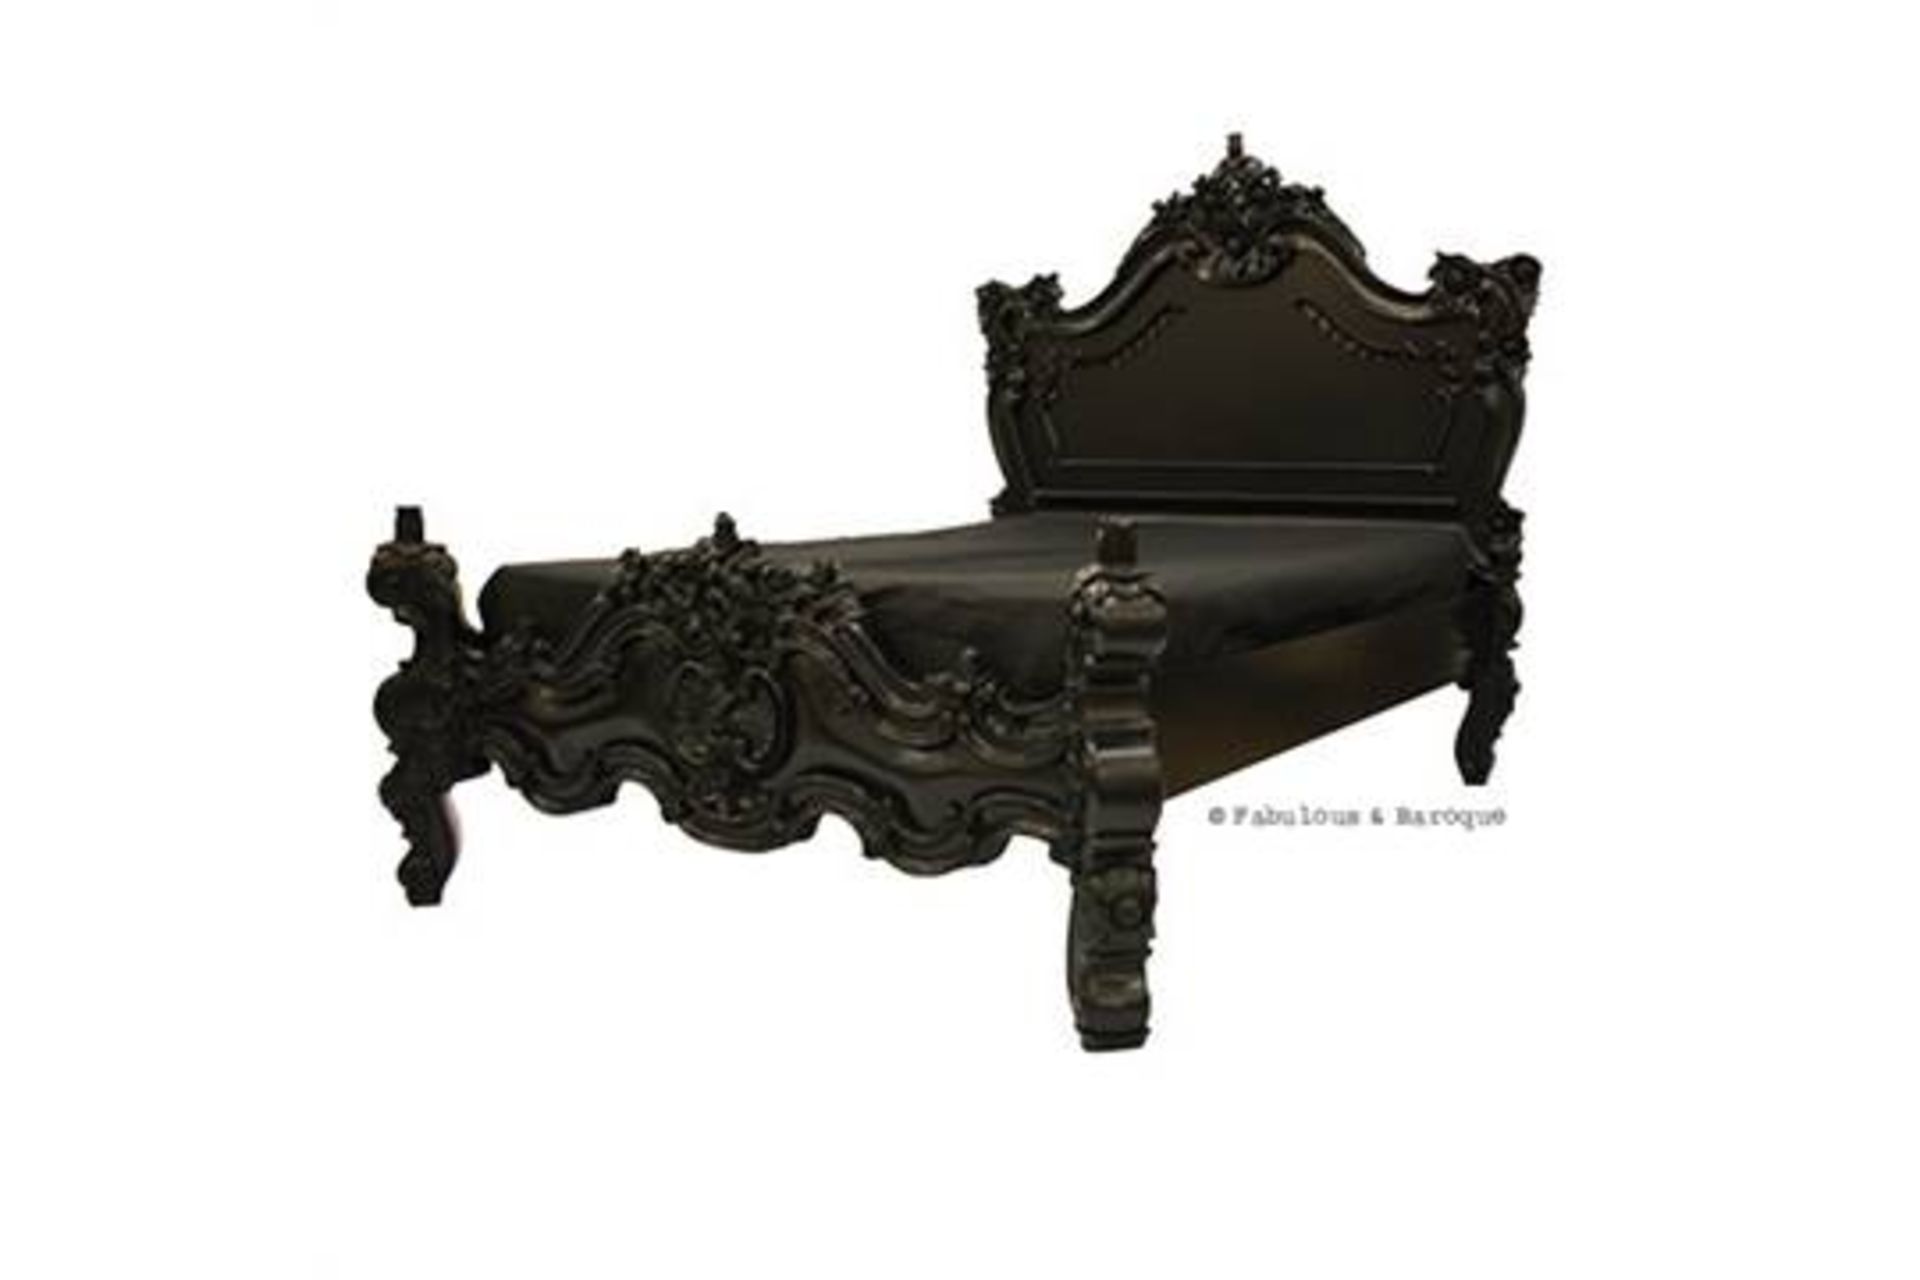 5ft  Double
Royal Fortune Montespan Bed - Black -  The Fabulous & Rococo Bed features
exaggerated - Image 5 of 6